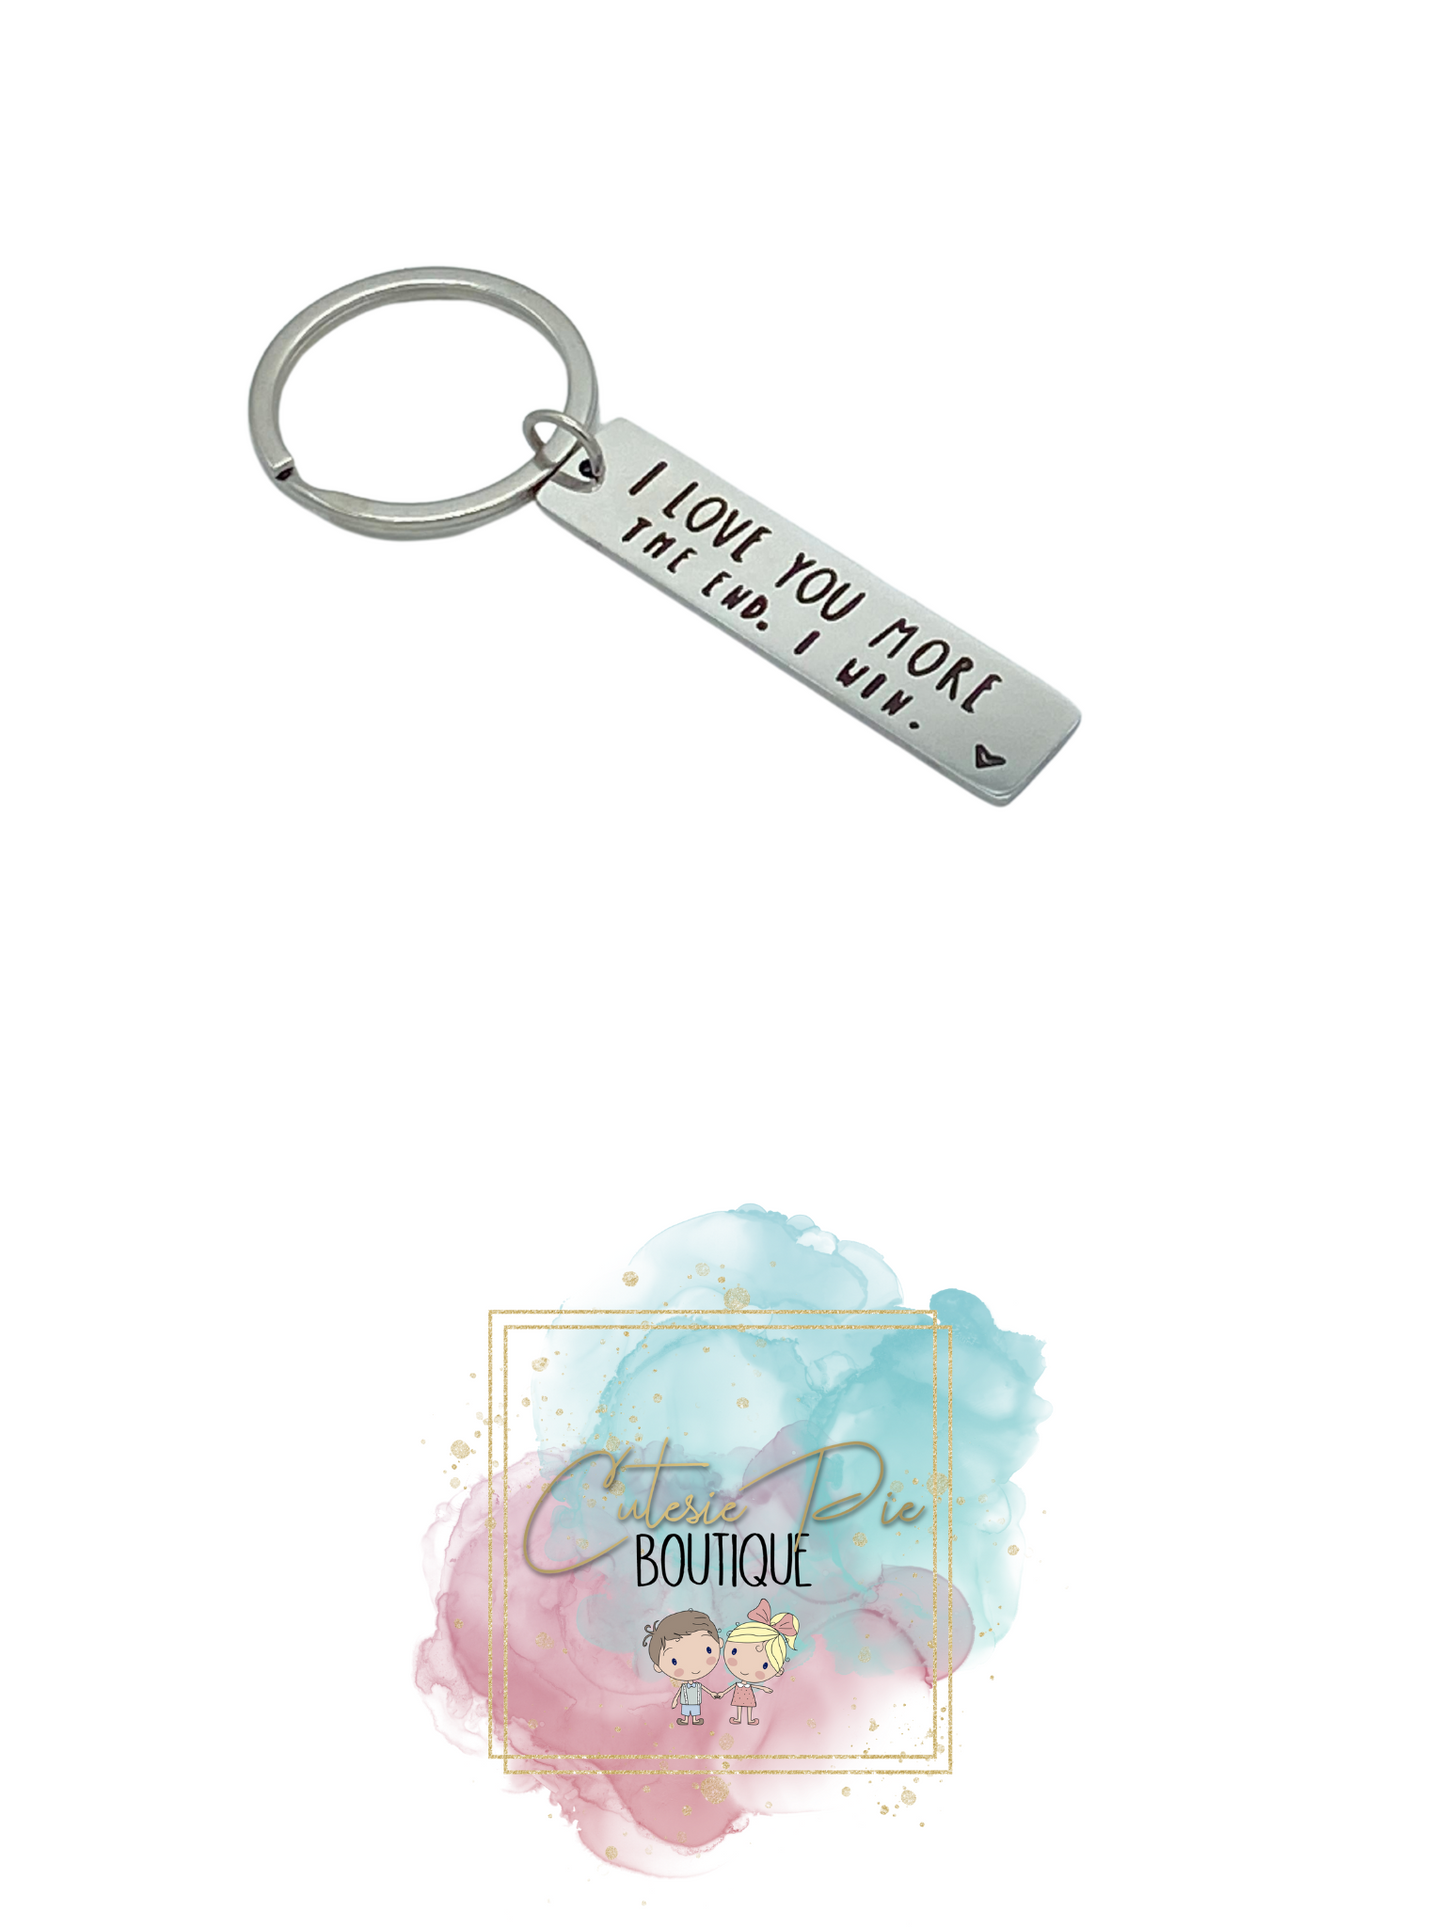 Keychains w/ Inspirational or Funny Quotes